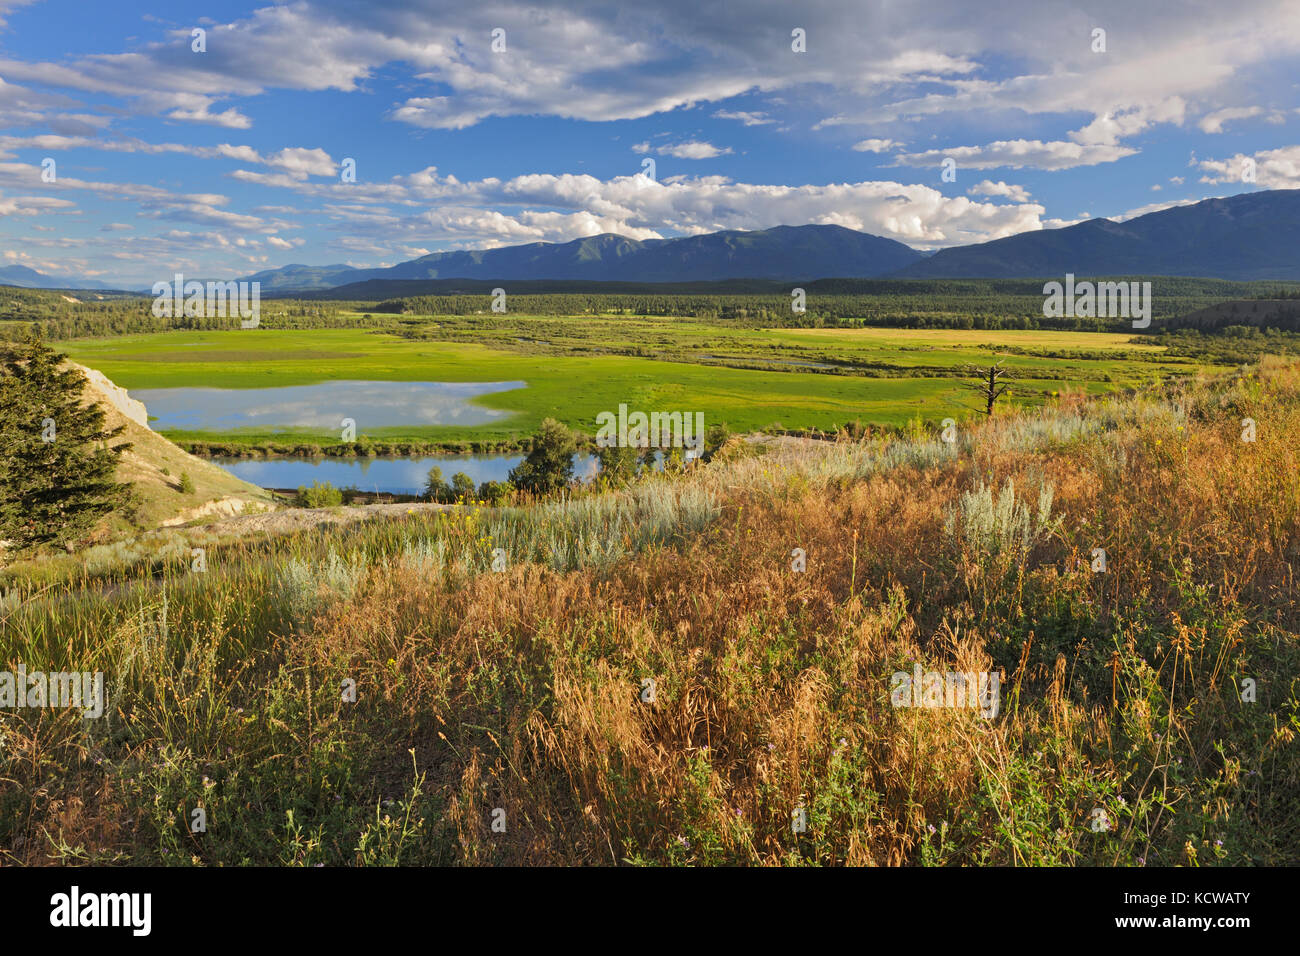 Looking south west across the Columbia Valley to the Purcell Mountains, Radium, British Columbia, Canada Stock Photo